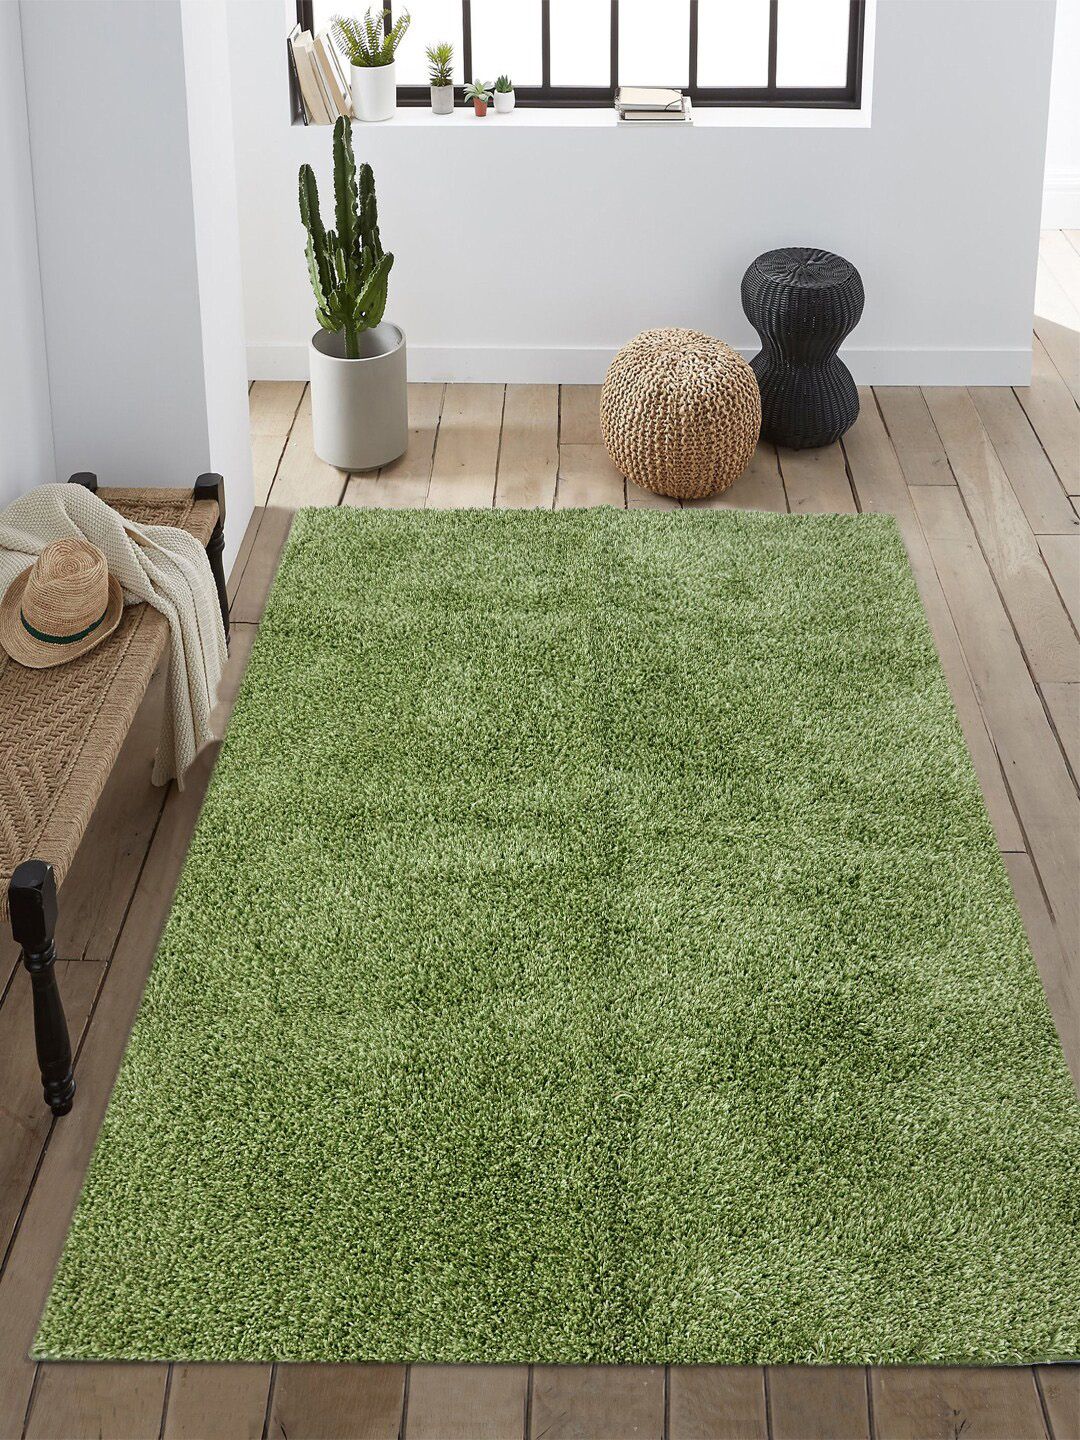 Saral Home Green Solid Anti-Skid Carpet Price in India